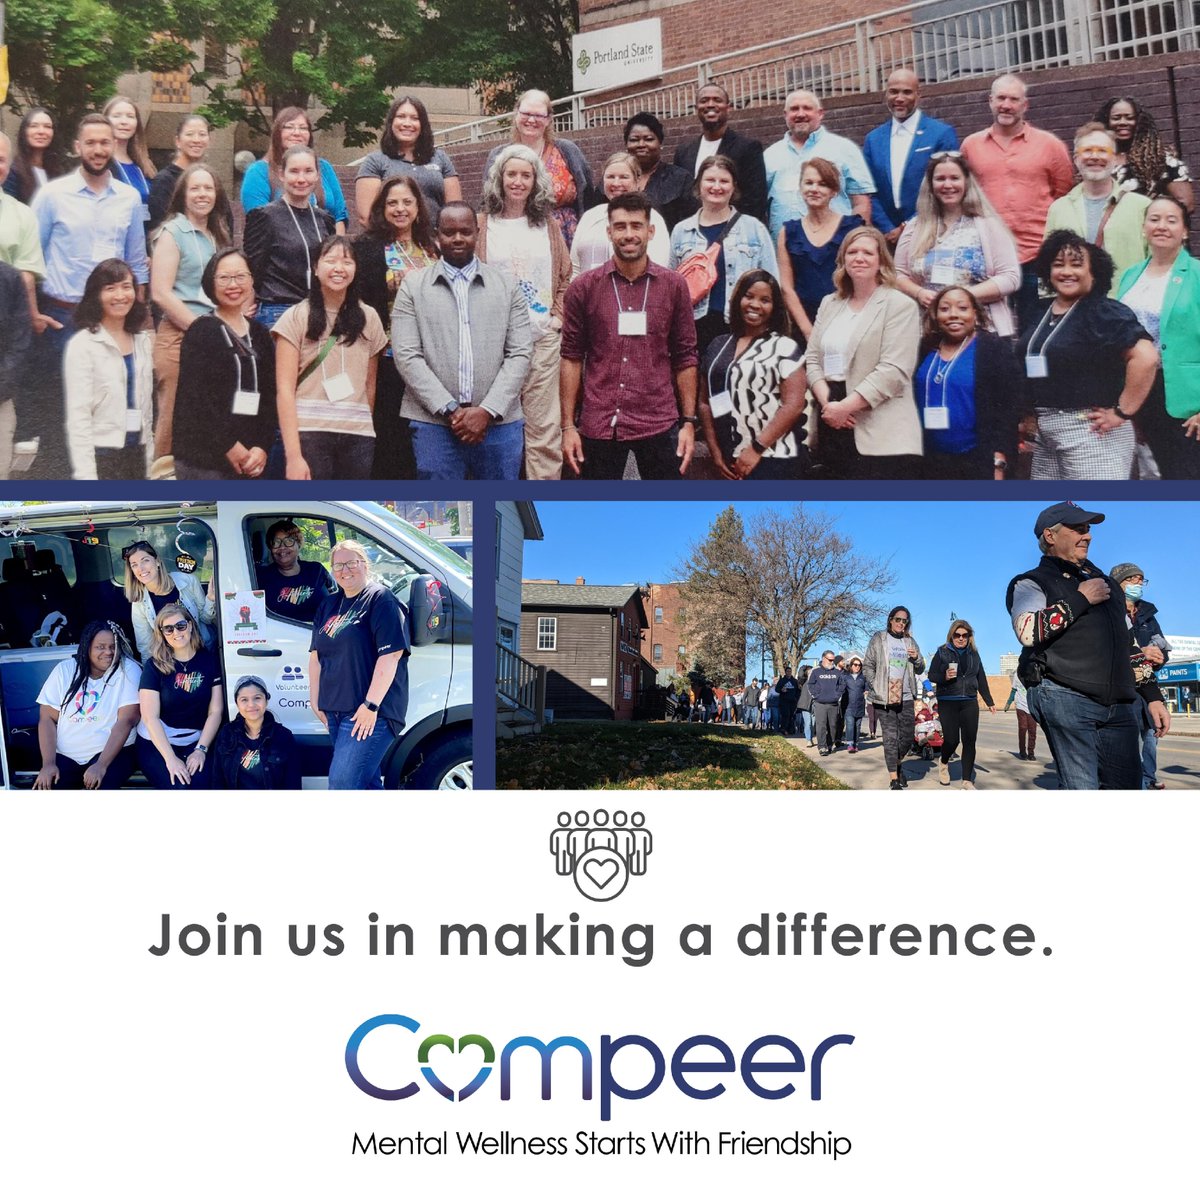 Compeer International is a non-profit that uses their proven model of mental health support through meaningful friendships with others. Donate today using the link compeer.org/donate/.